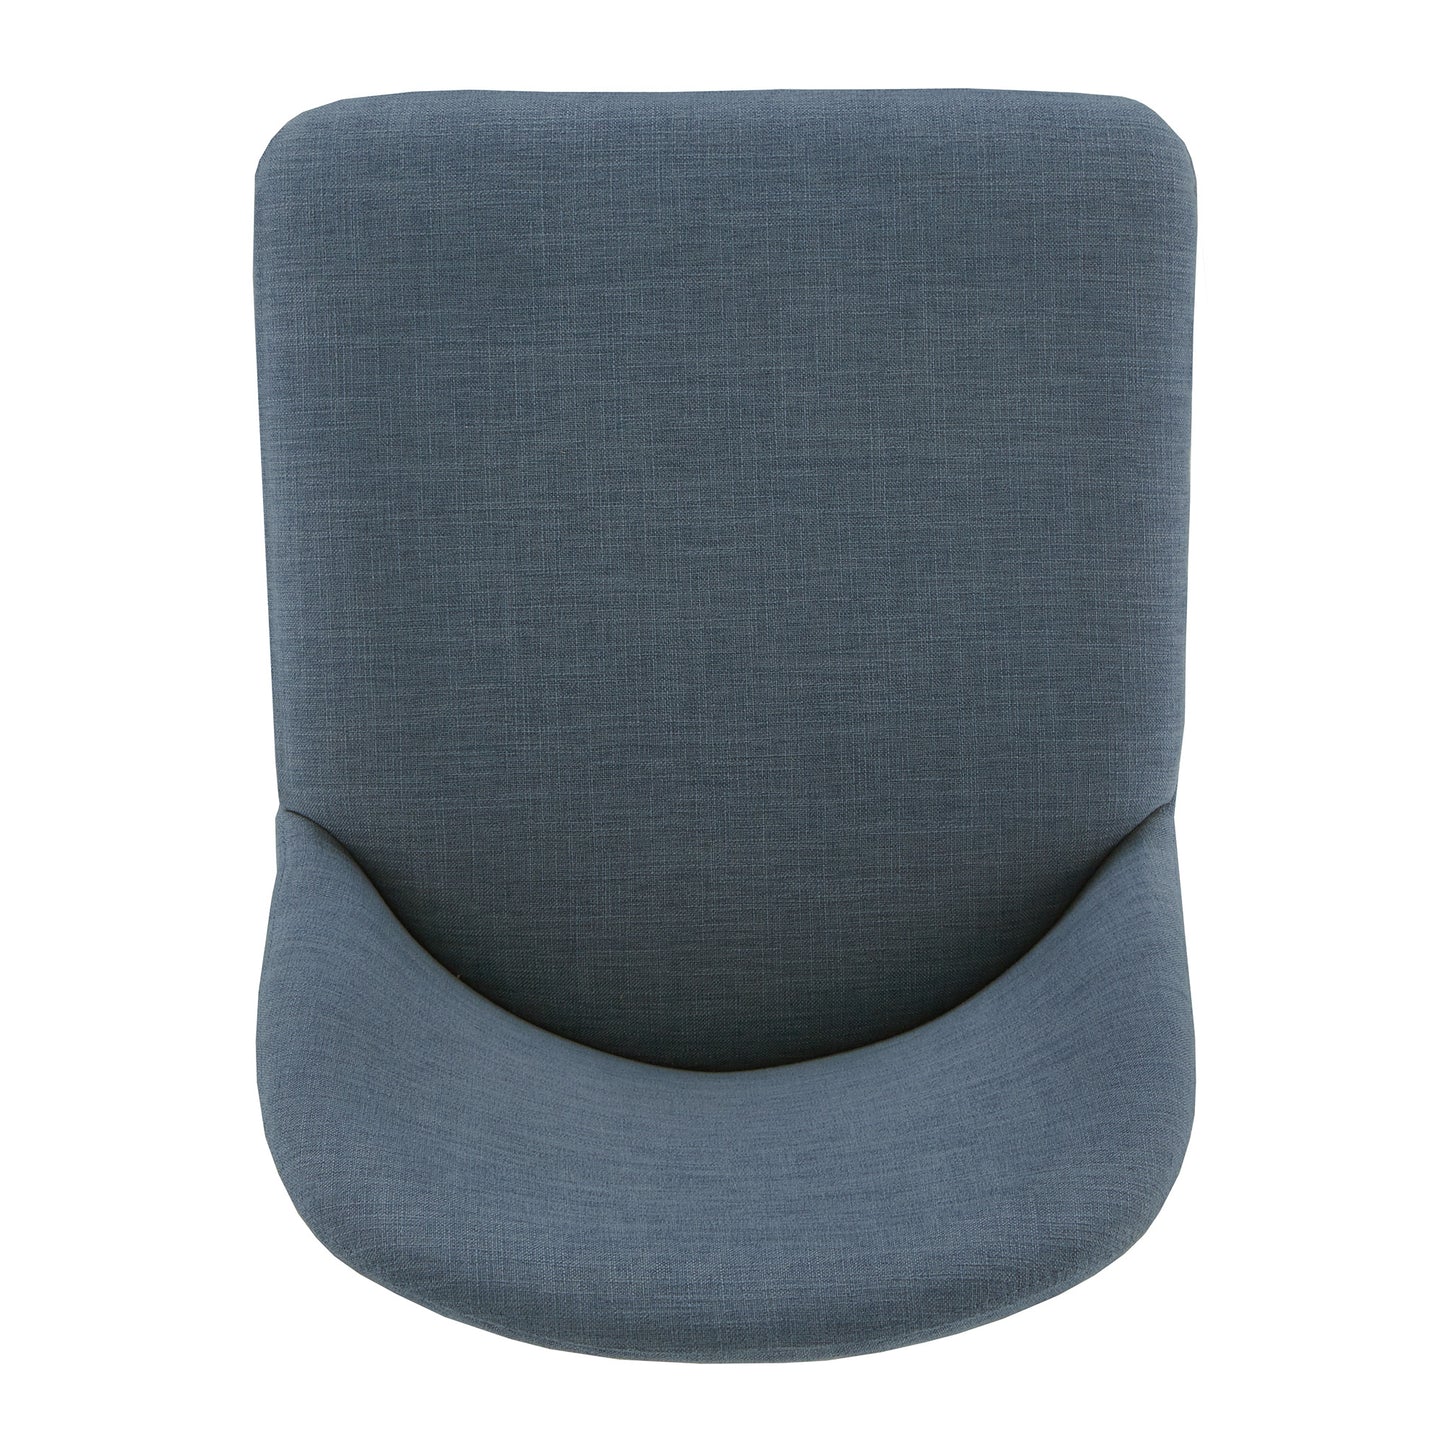 Linen Upholstered Dining Chairs (Set of 2) - Peacock Blue